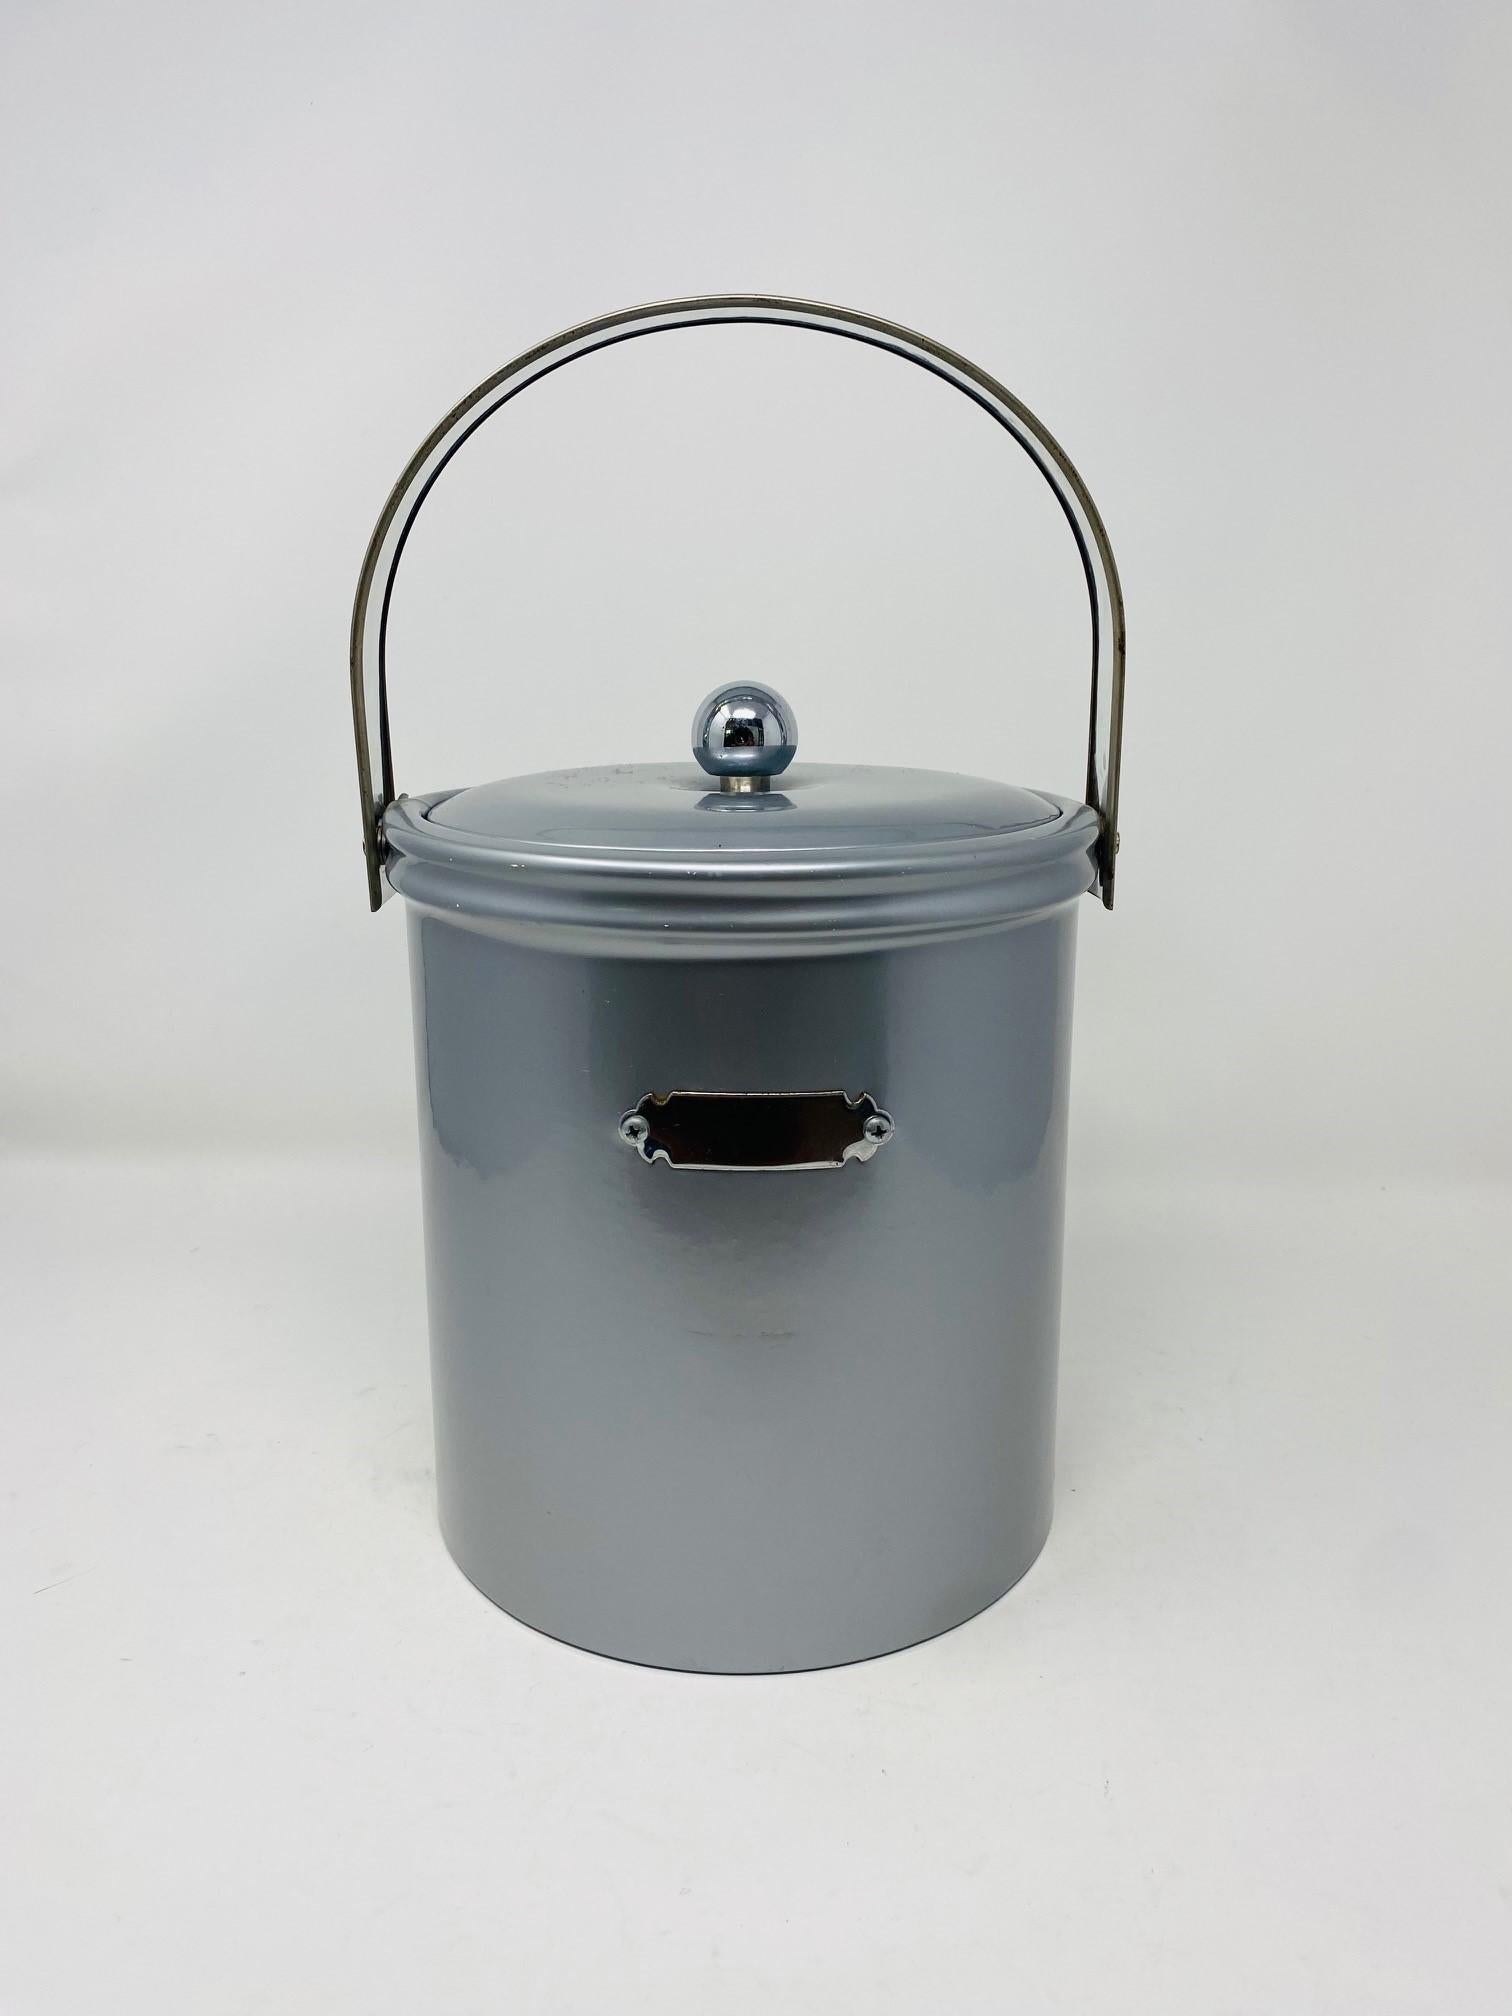 Beautiful vintage ice bucket by Georges Briard.  This piece is finished in a monochrome silver tone with a chrome covered handle that adds a current and distinct look.  The ice bucket includes a statement silver plaque that can be used for